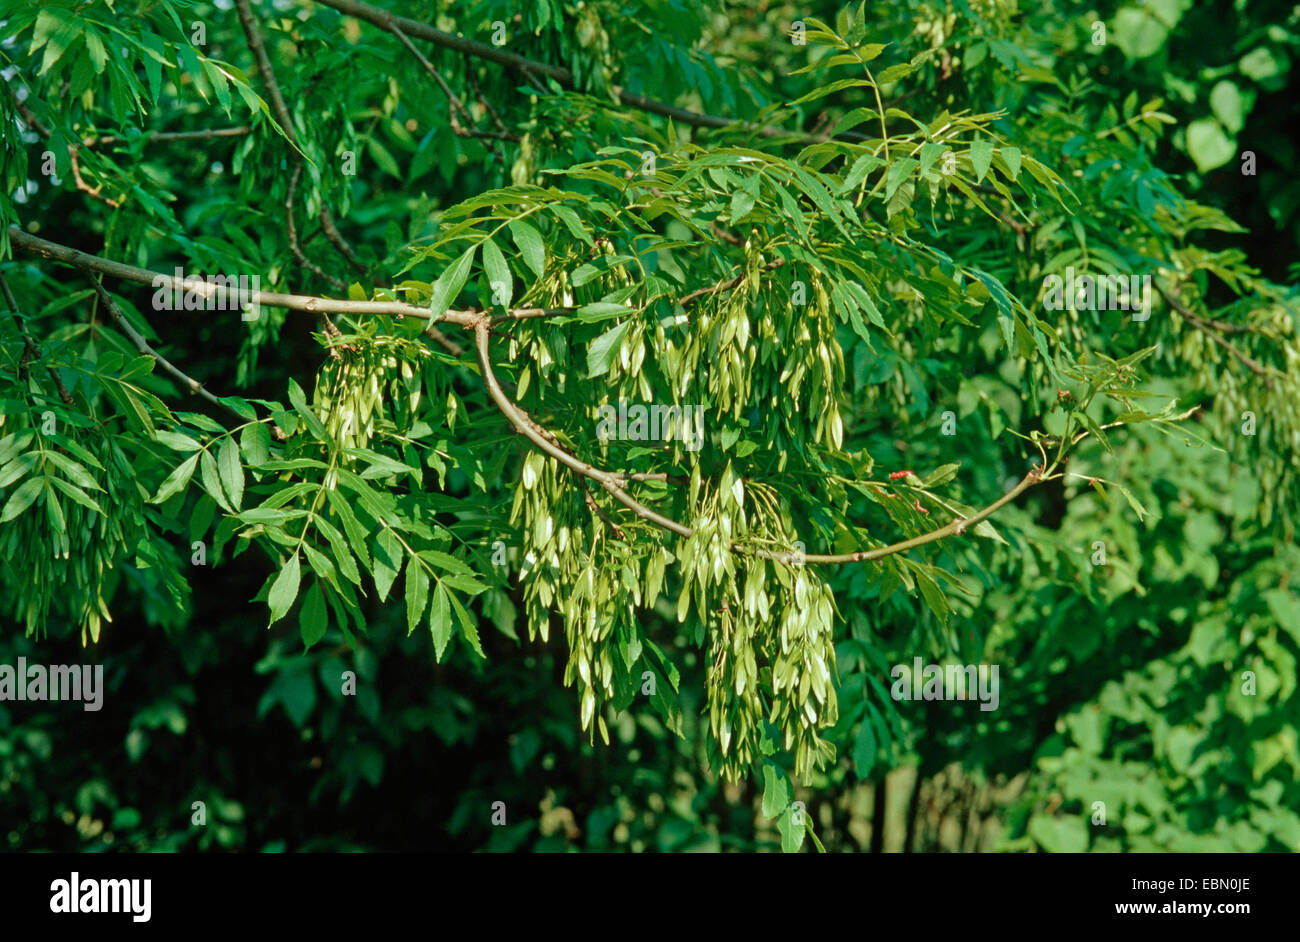 common ash, European ash (Fraxinus excelsior), branch with immature fruits, Germany Stock Photo